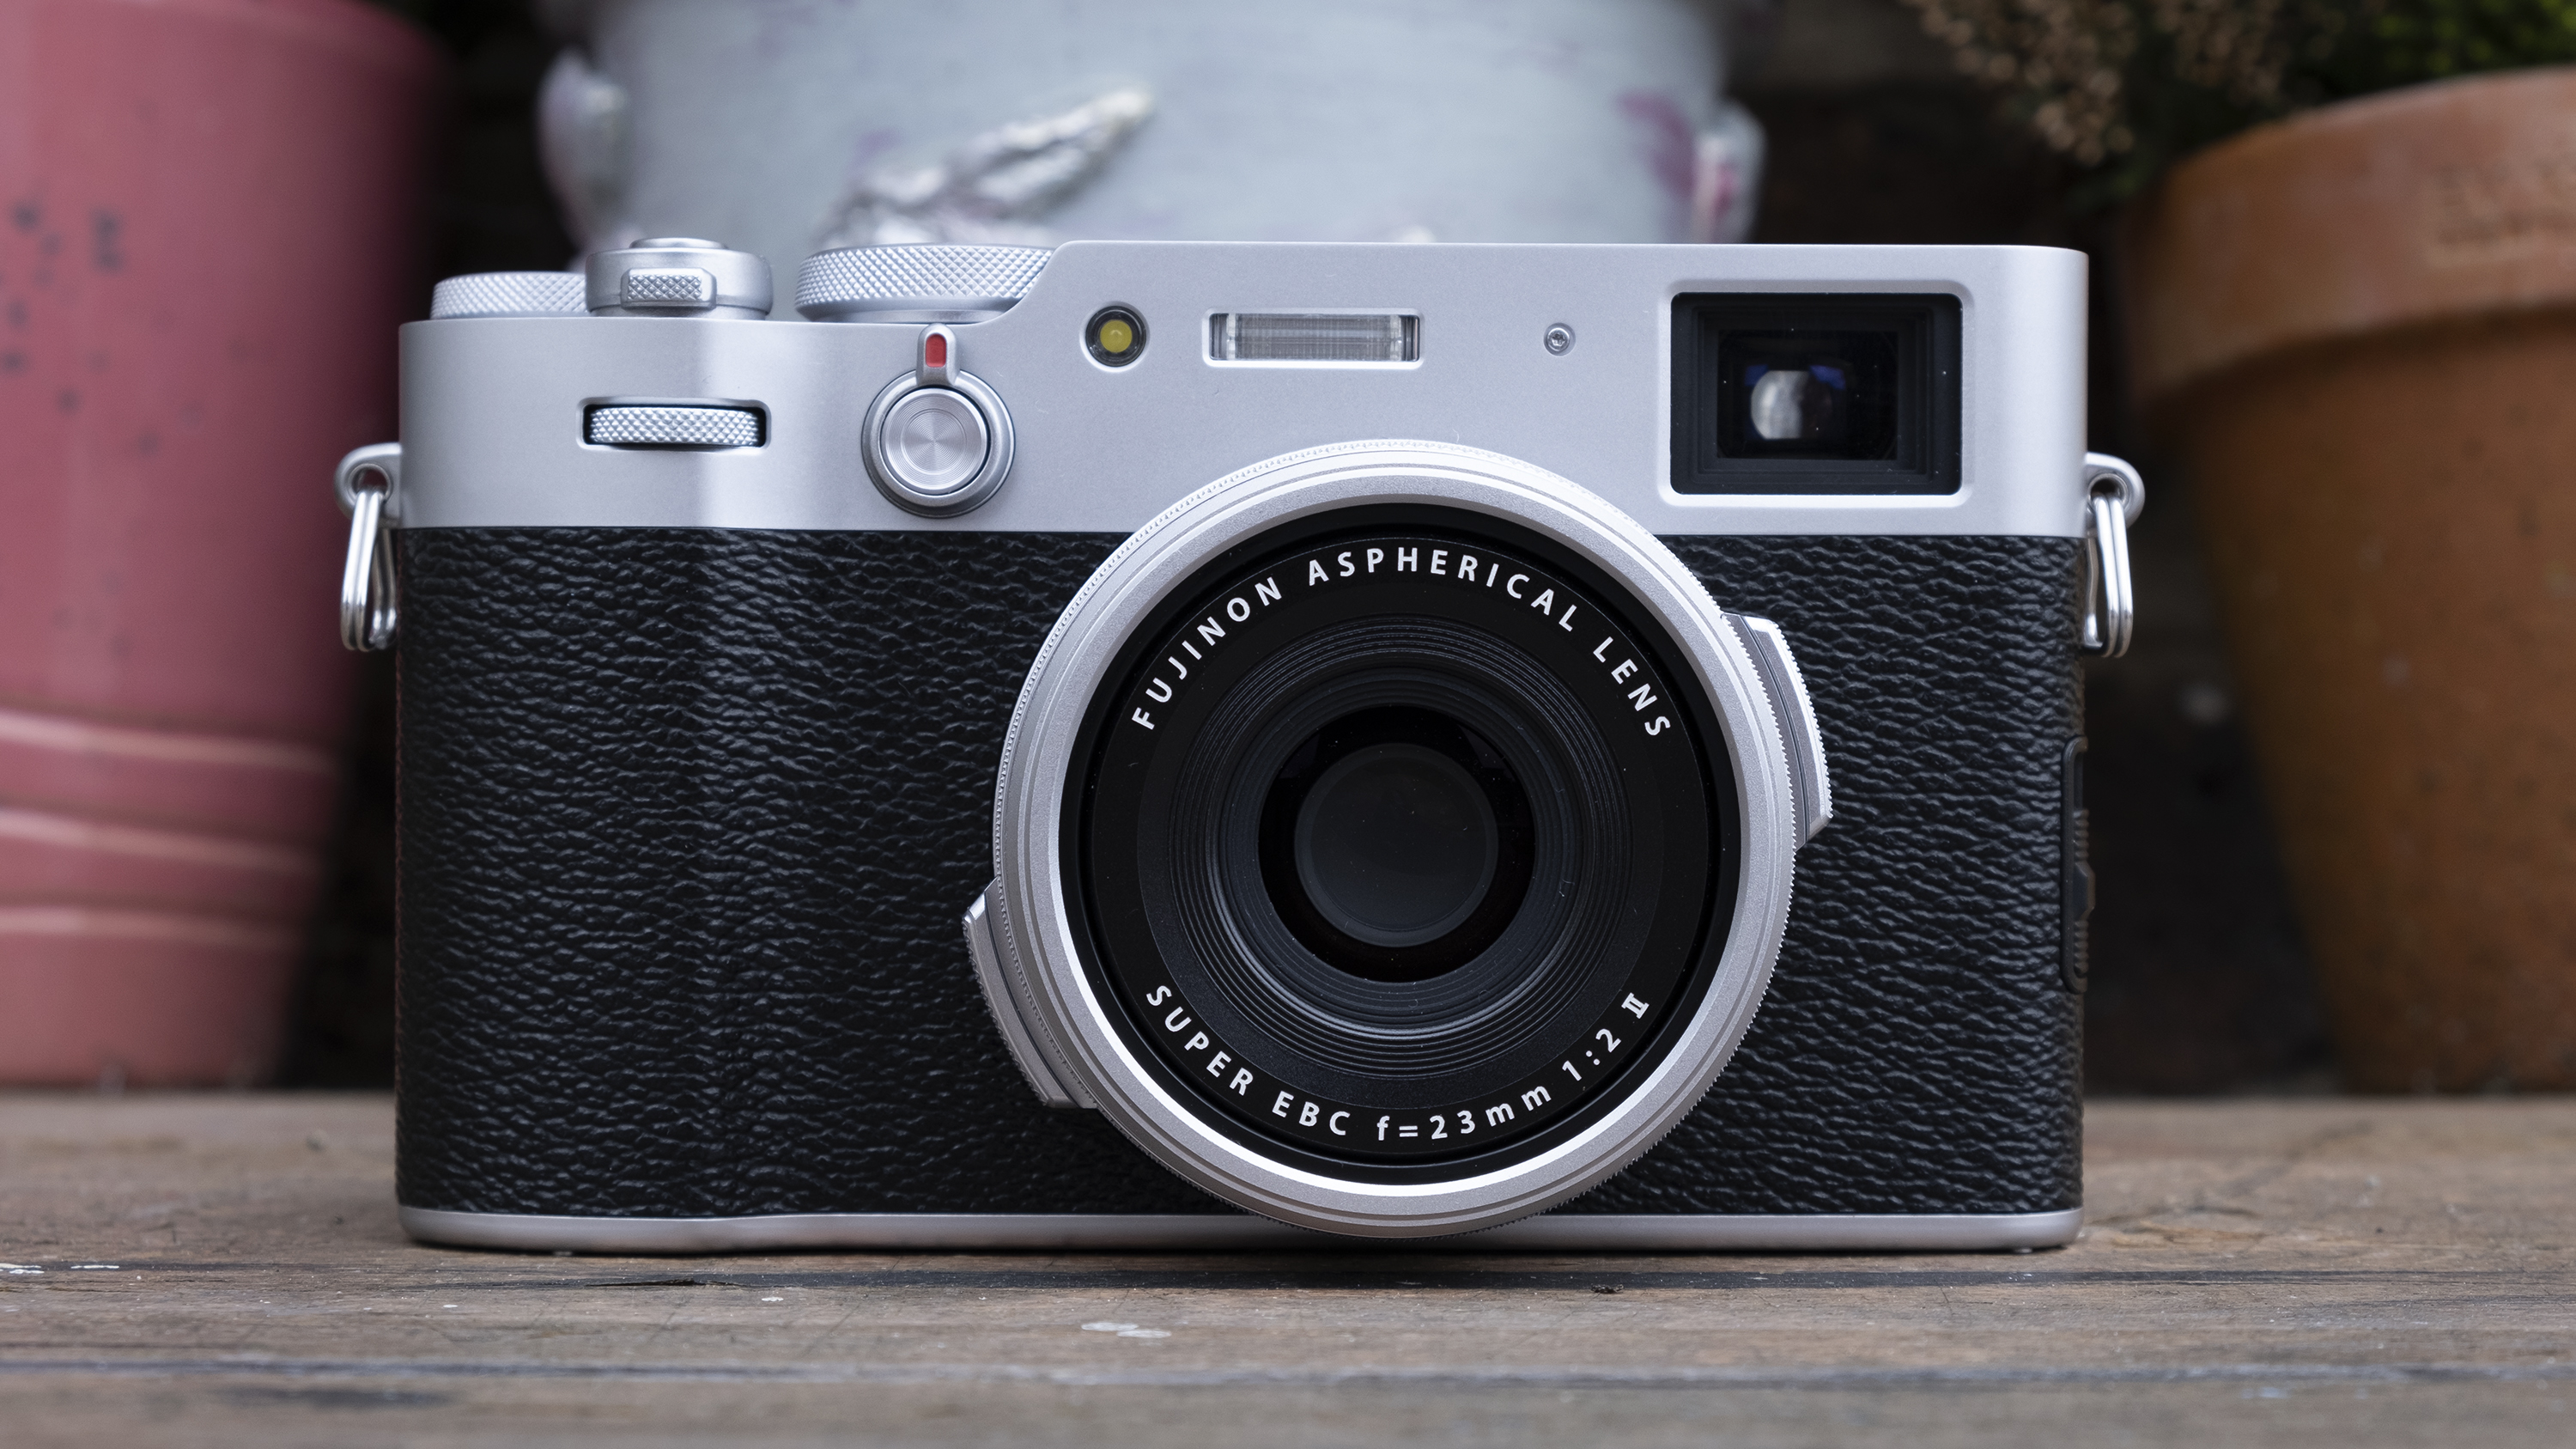 The Fujifilm X100V compact camera in front of flower pots